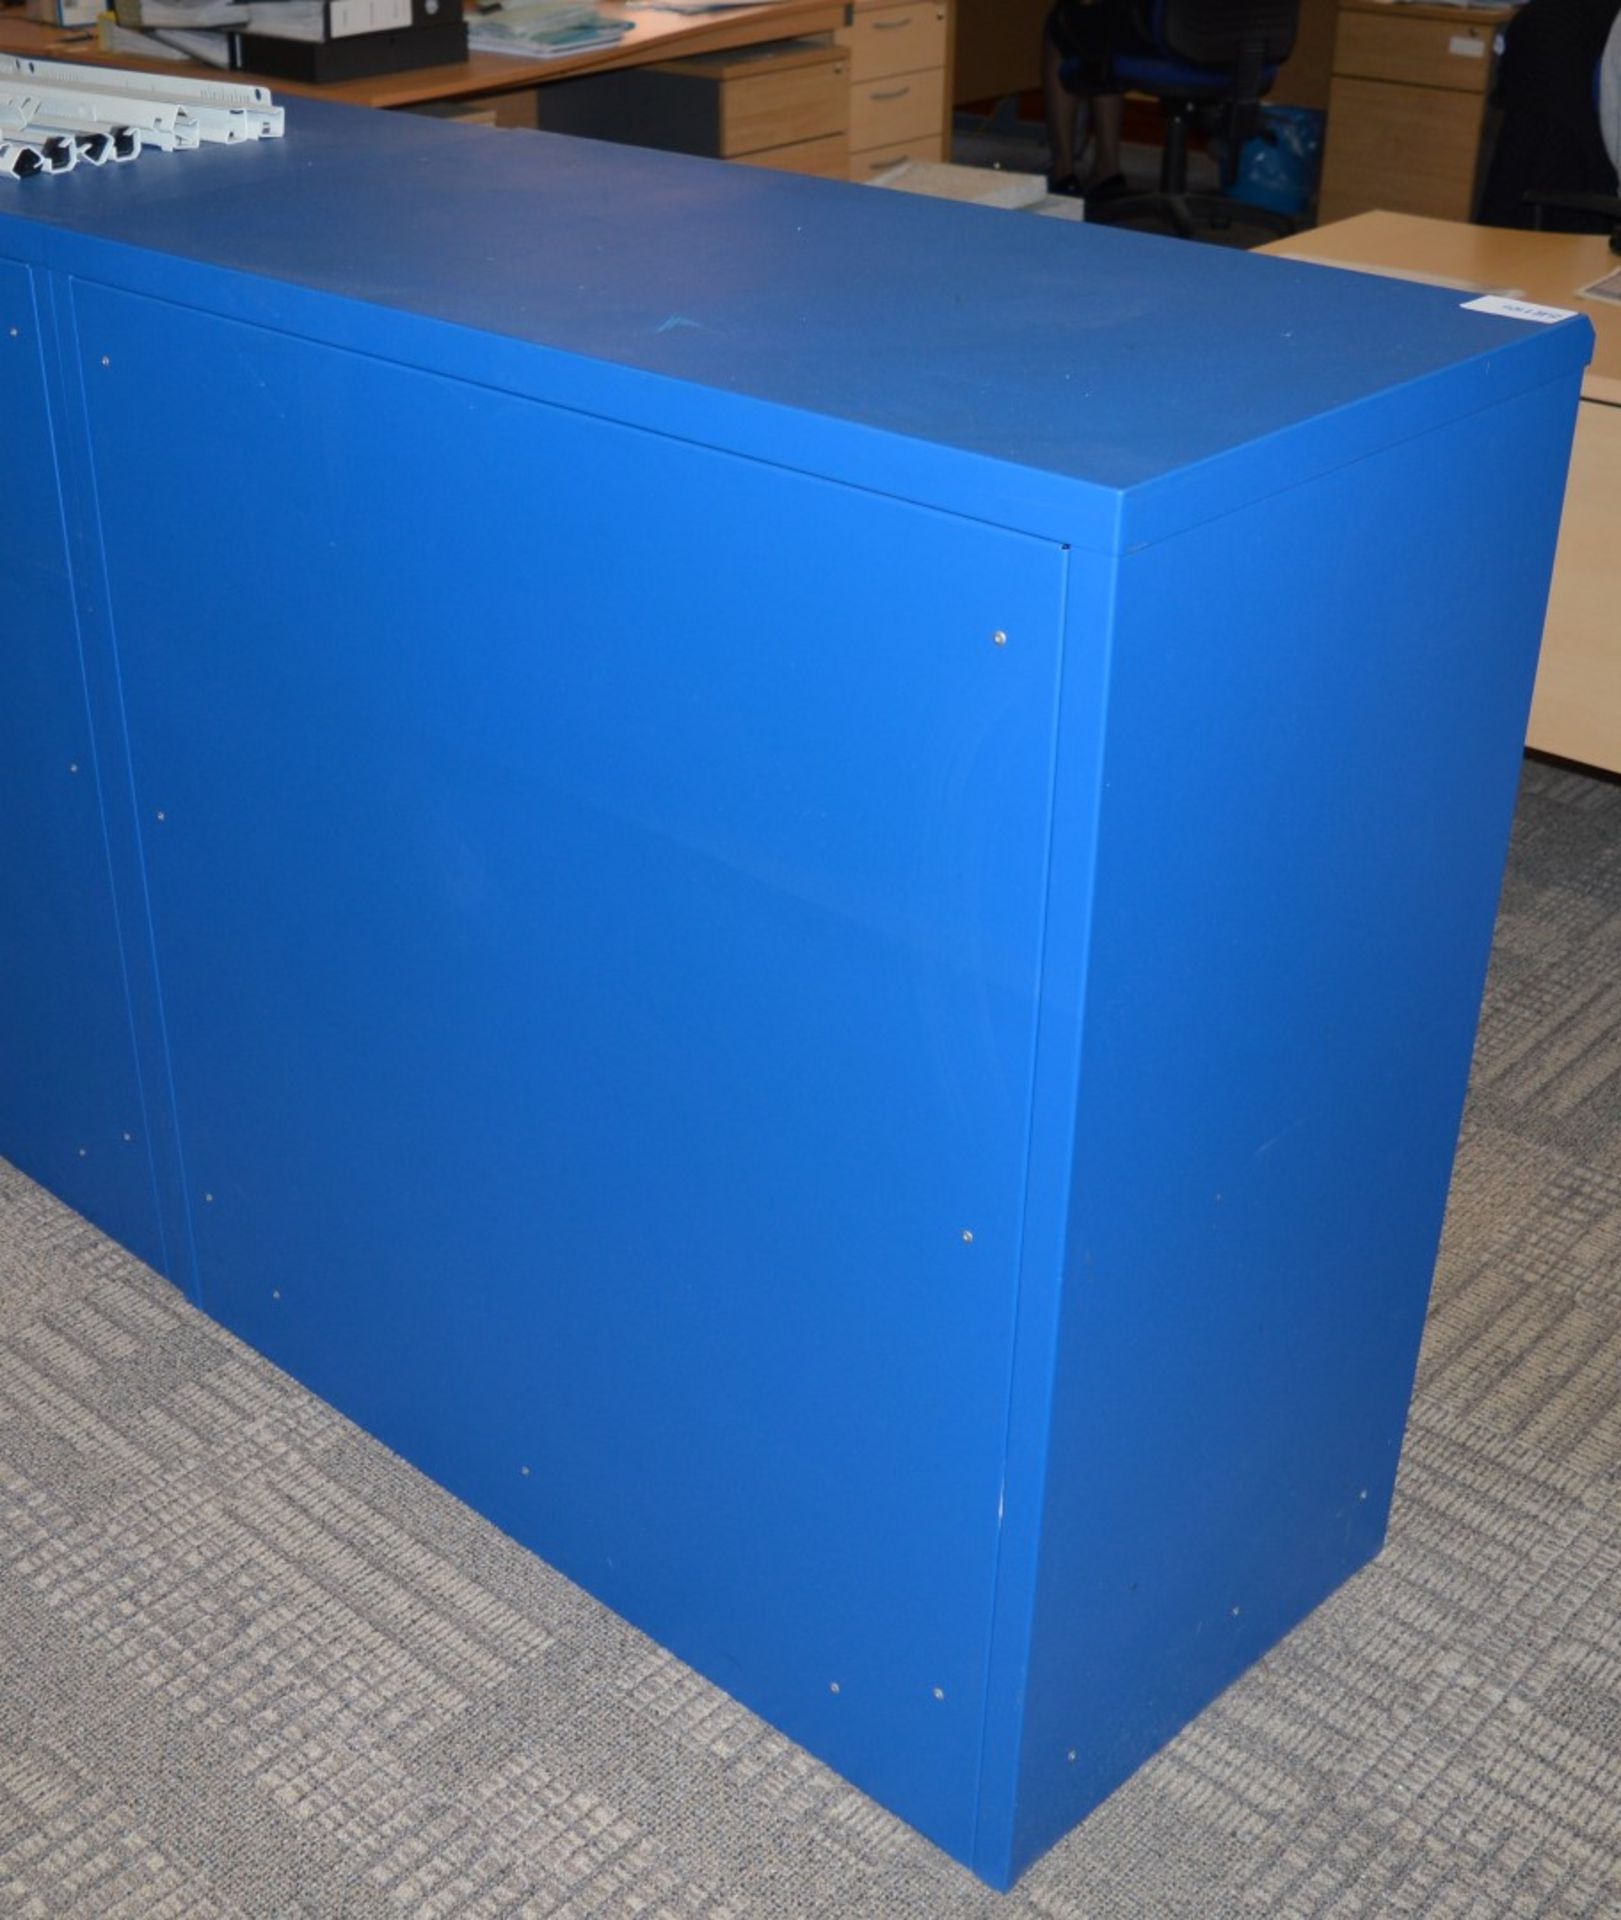 1 x Silverline Office Storage Cabinet With Tambour Sliding Doors - BLUE - Does NOT Include Key - - Image 3 of 3